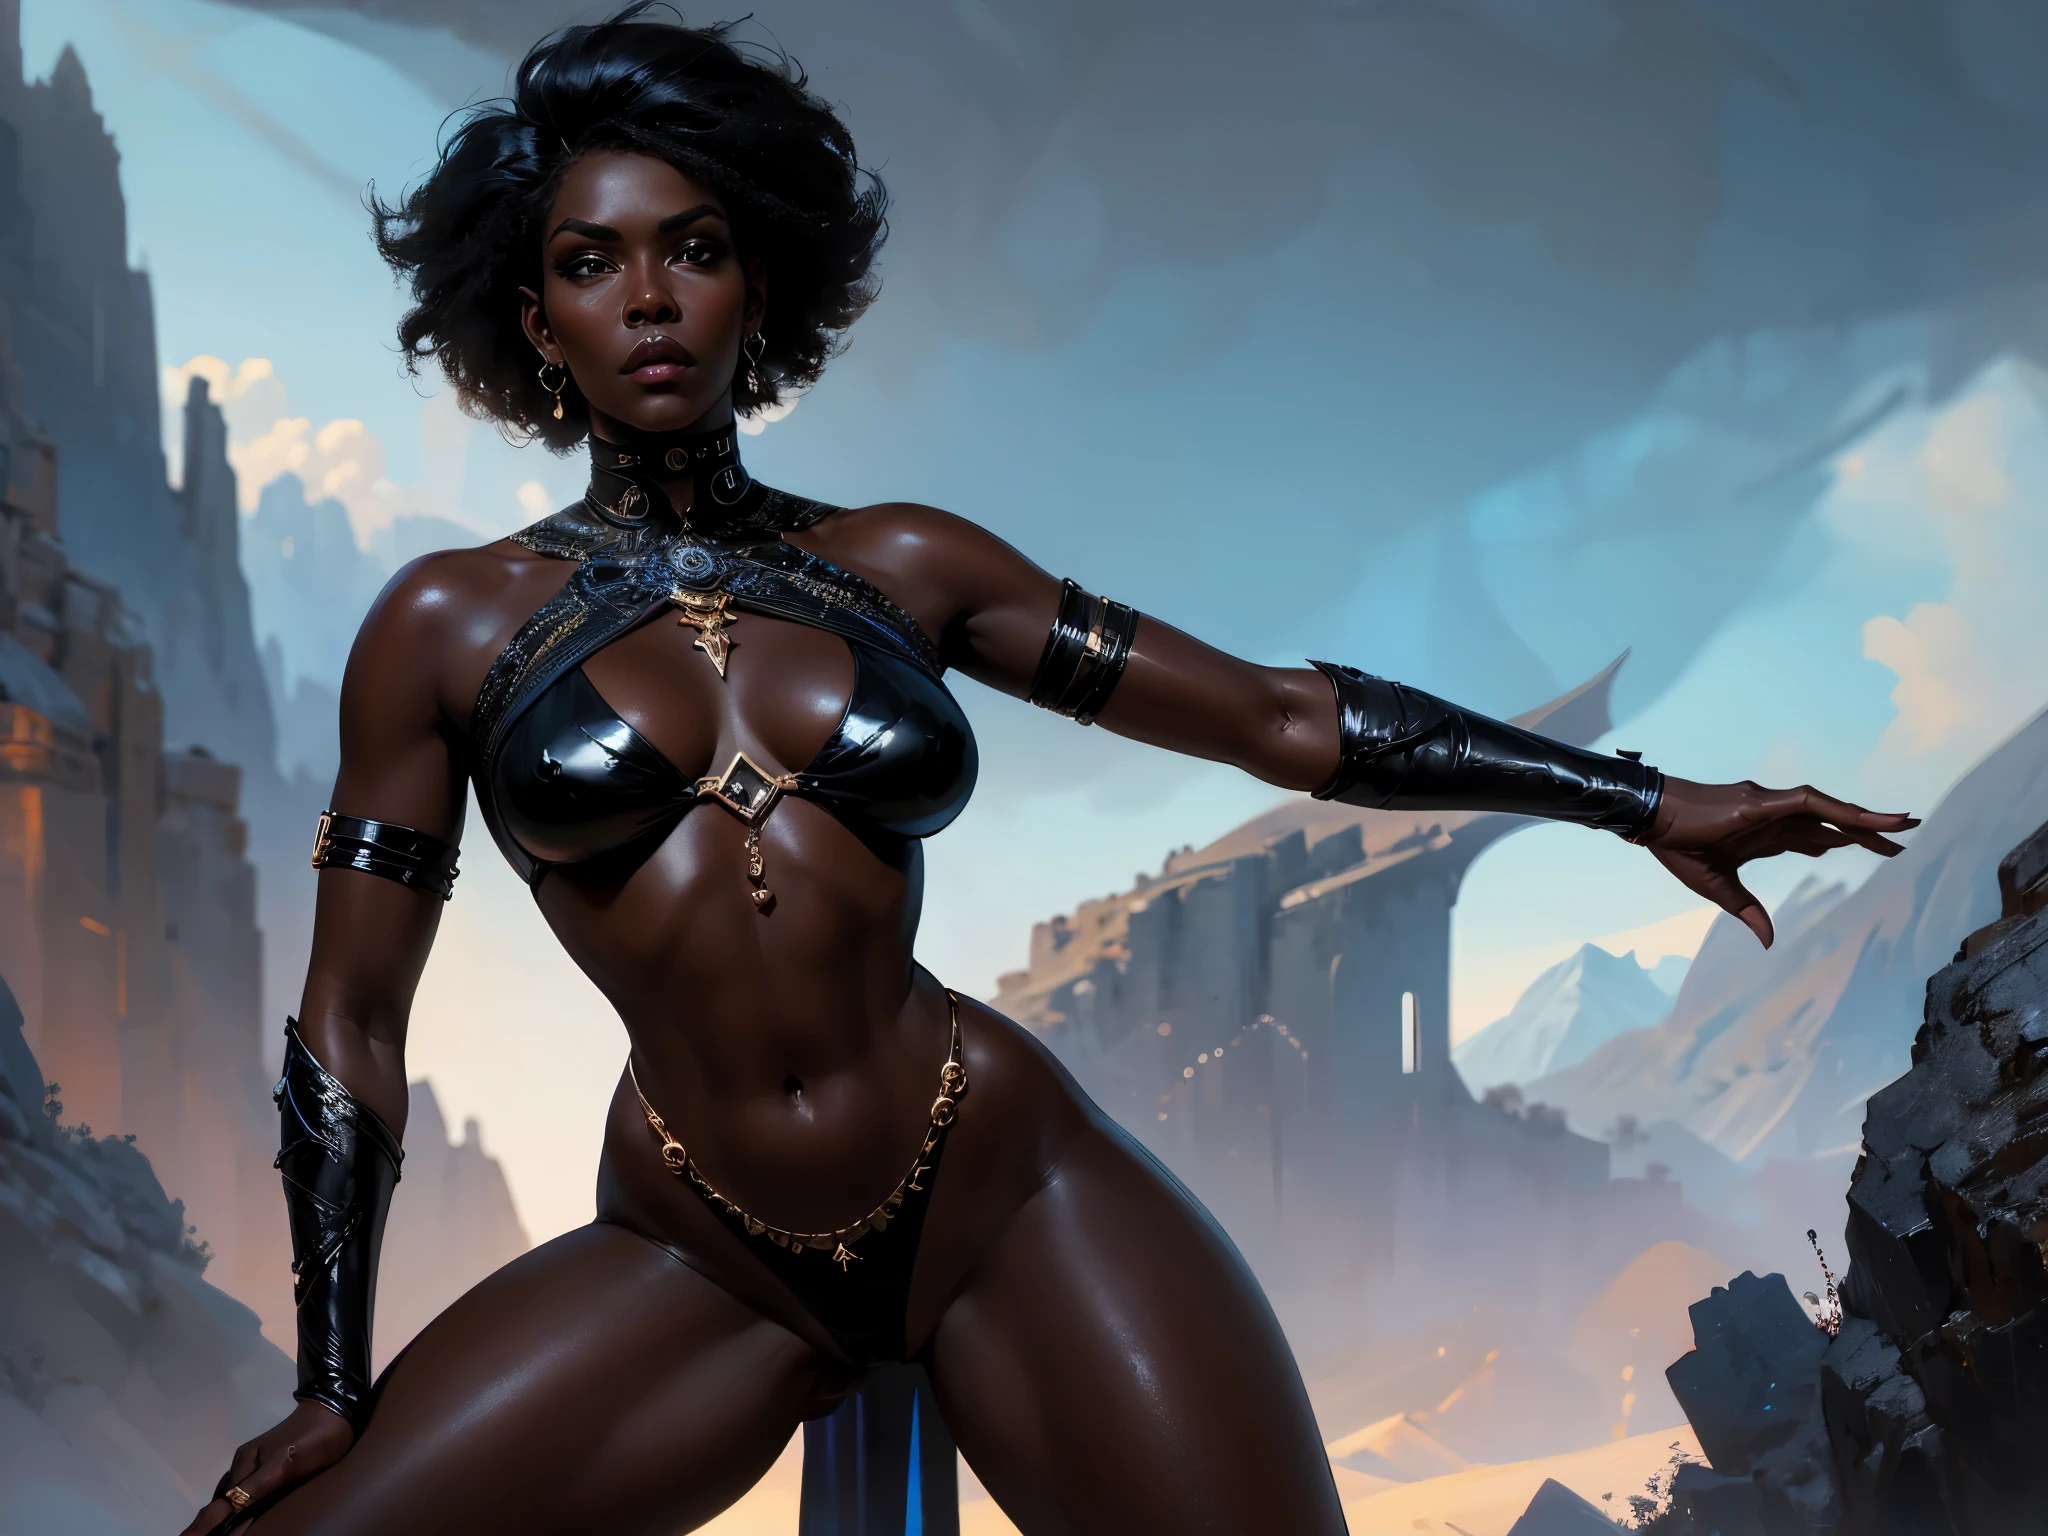 looking back,  A feisty mature ebony woman in action, high definition digital art, painting style, eternal fantasy digital art.
perfect facial proportions, perfect nose perfect lips perfect face, With bare breasts, in thong full body beautiful and very sexy holding a futuristic sword in her hand,
Perfect curved legs in fighting pose with futuristic and fantasy armor on the legs,  in simple background